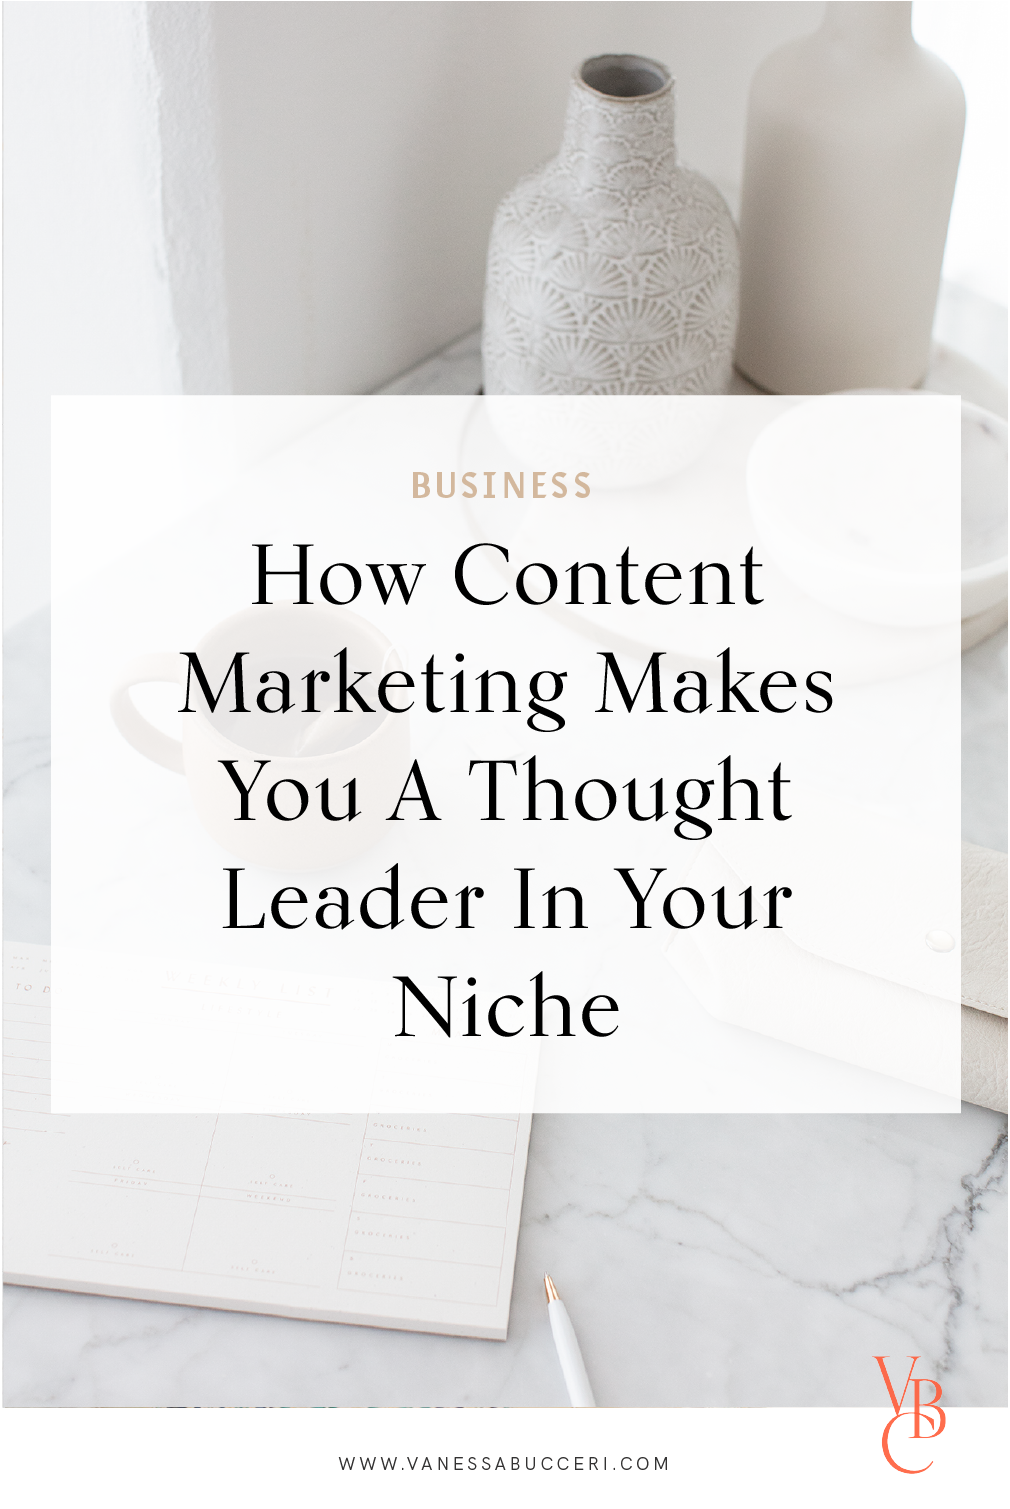 How content marketing makes you a thought leader in your niche